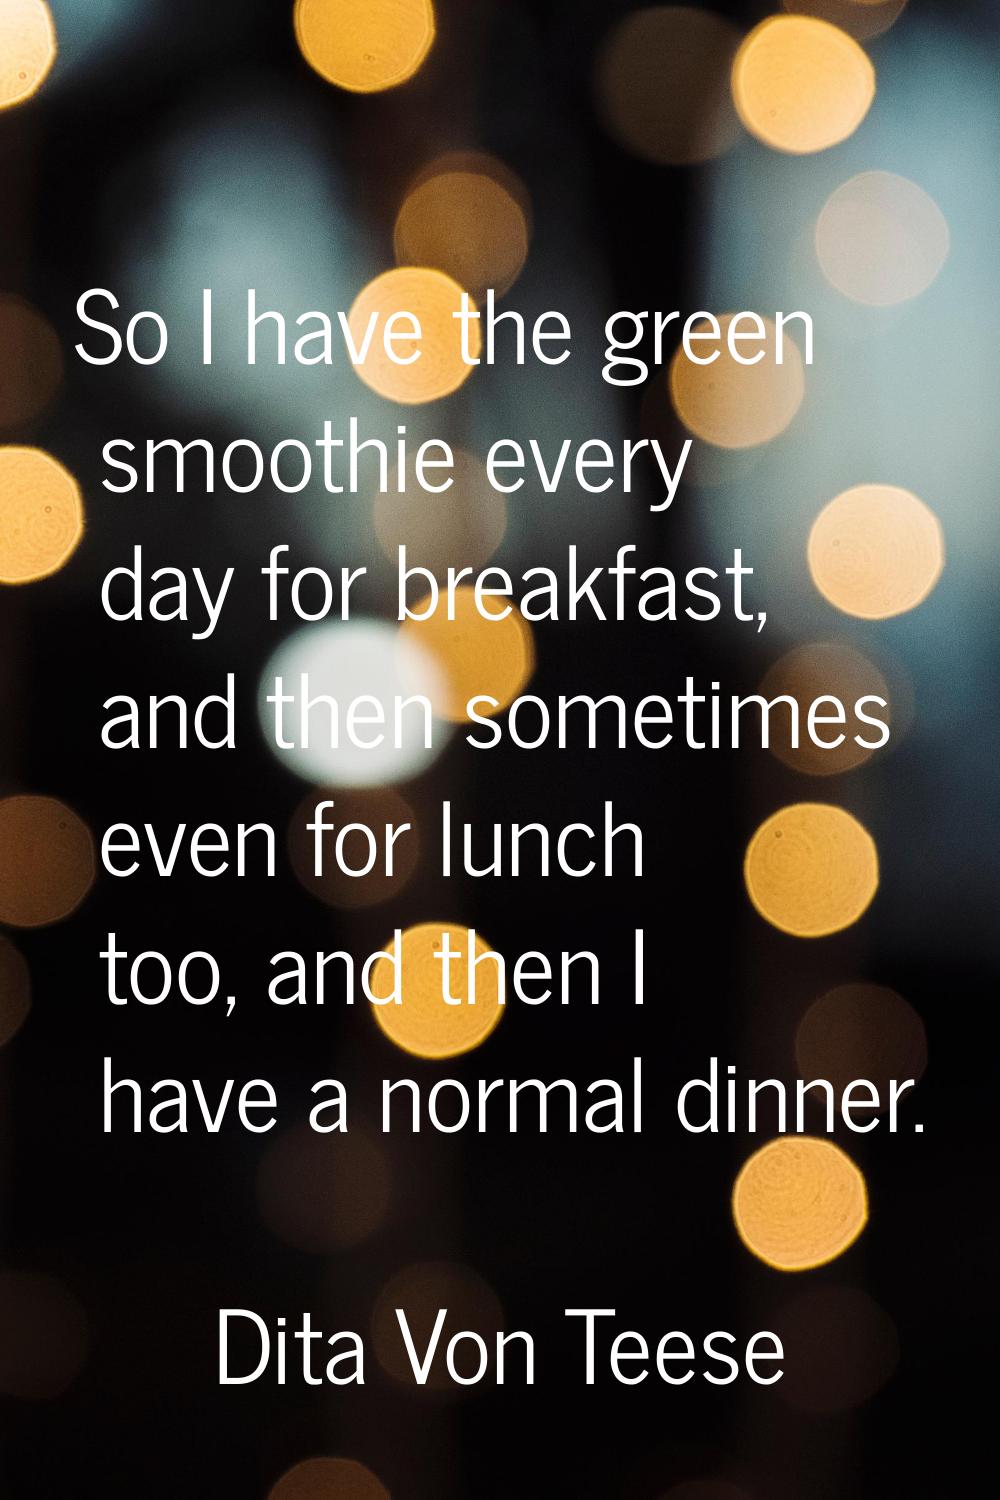 So I have the green smoothie every day for breakfast, and then sometimes even for lunch too, and th